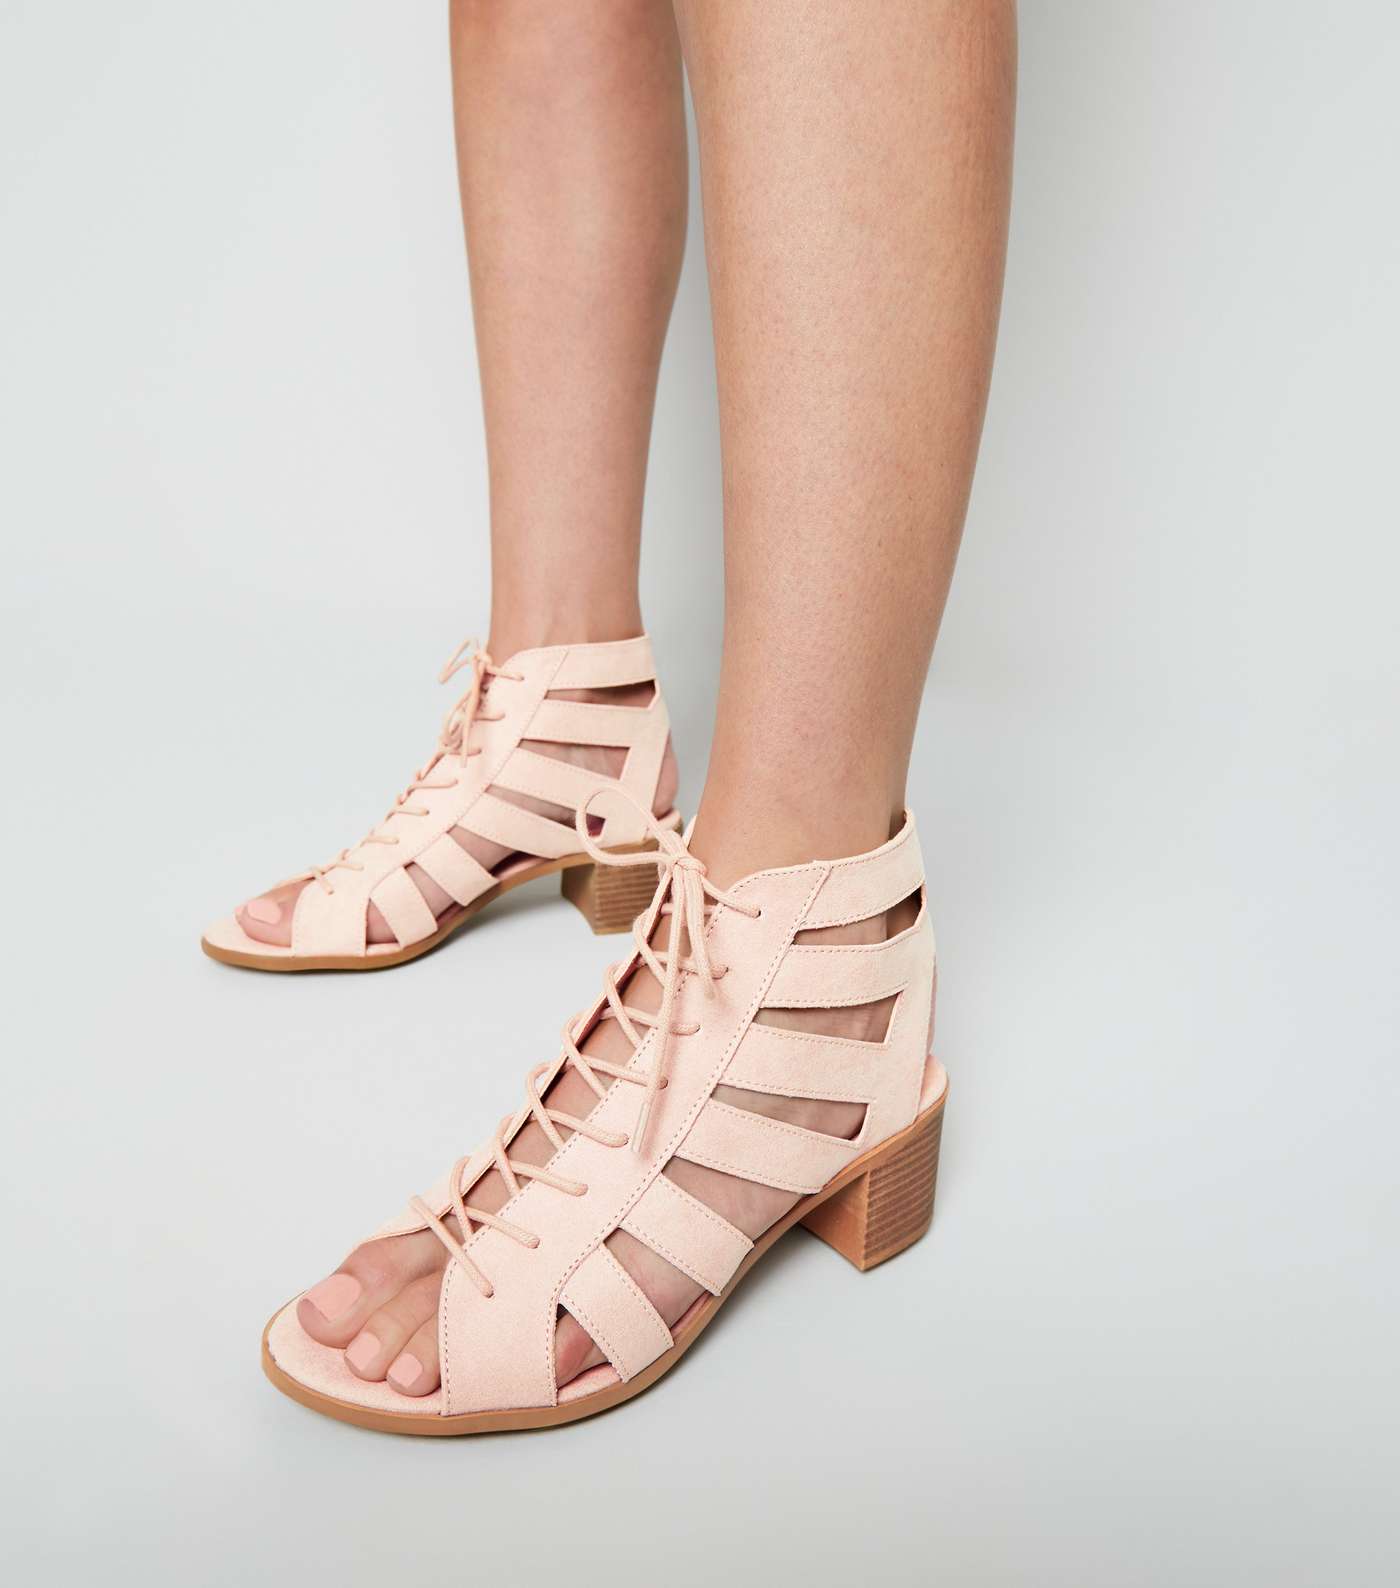 Nude Suedette Cut Out Mid Heel Ghillie Sandals Image 2